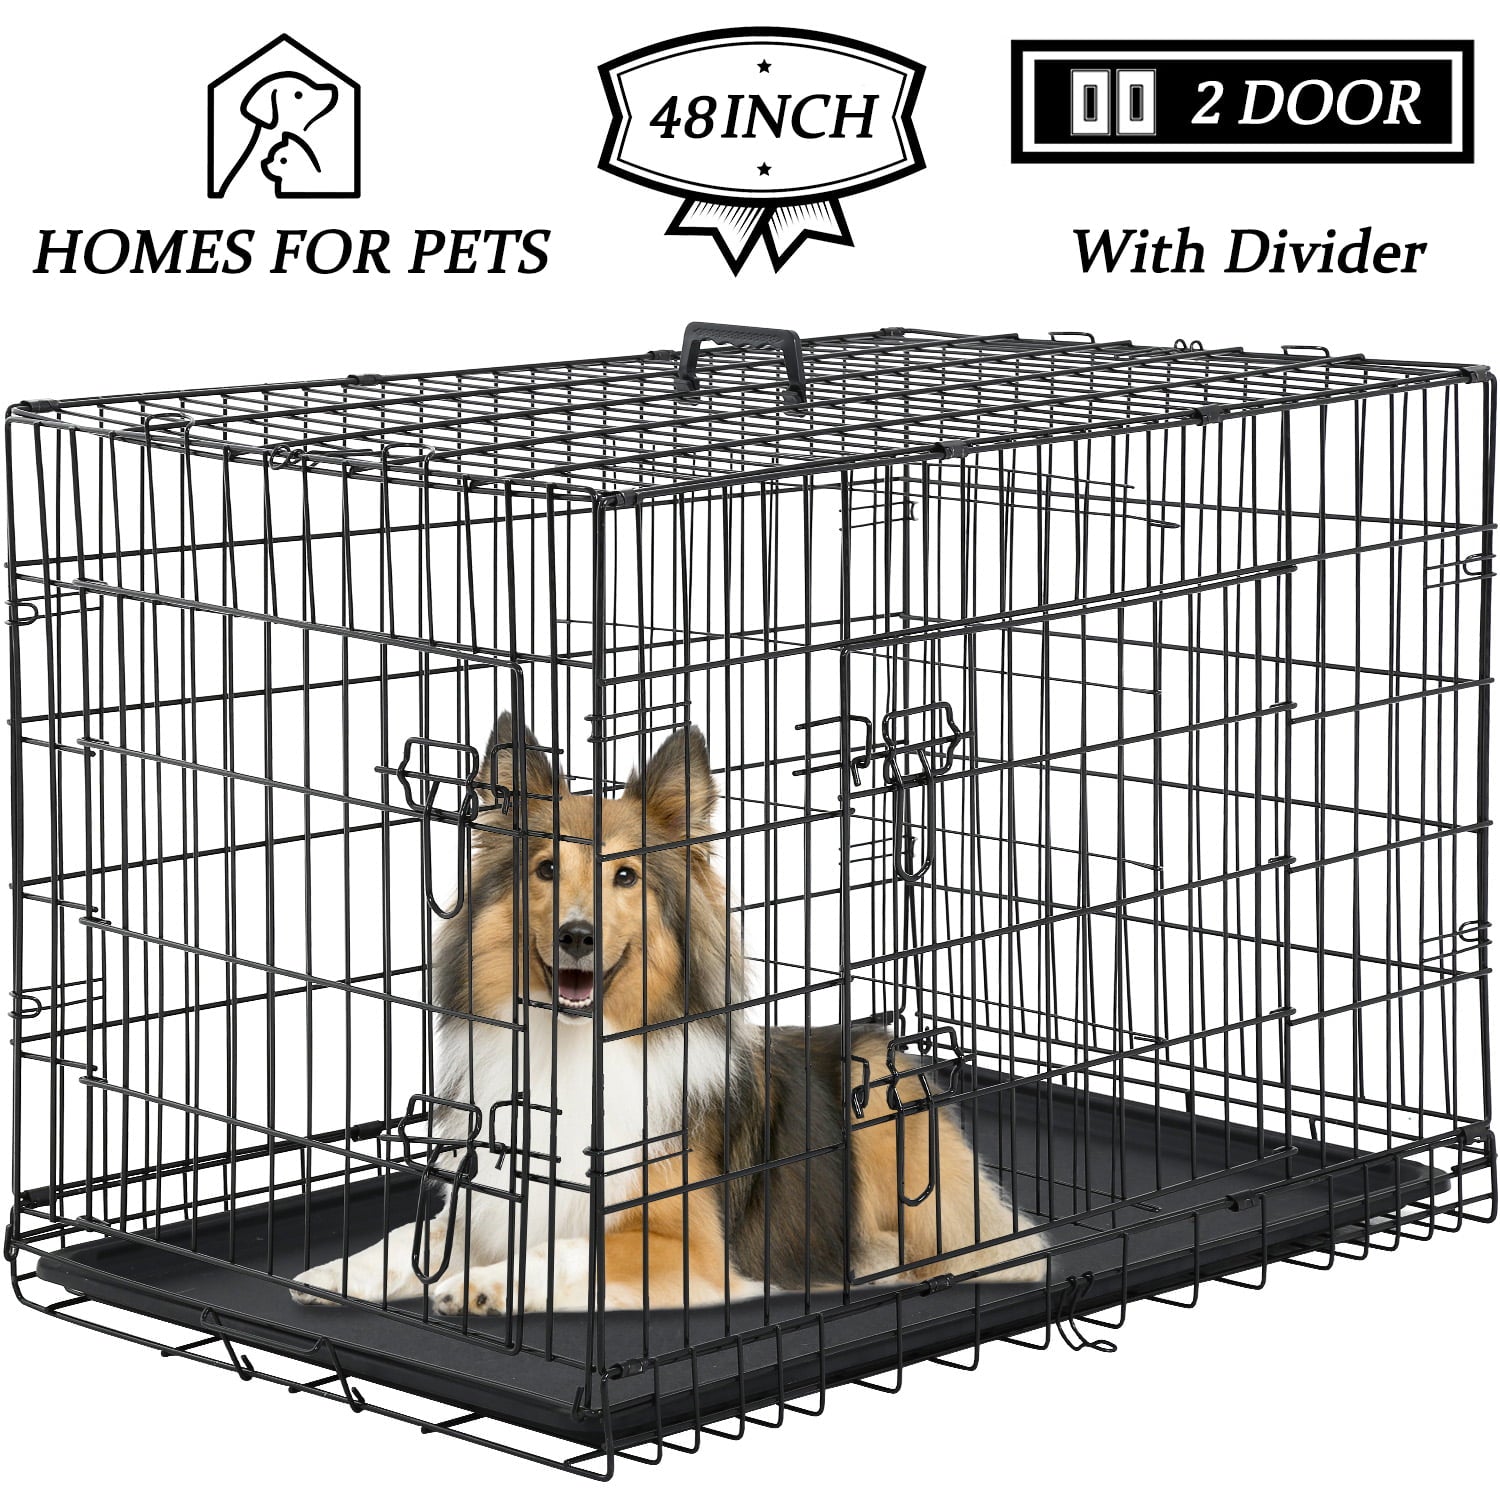 YRLLENSDAN 48 inch Foldable Large Dog Crate for Large Dogs， Metal Wire Dog Cage with Plastic Tray and Handle Double-Door Outdoor Dog Crates and Kennels for Medium dogs